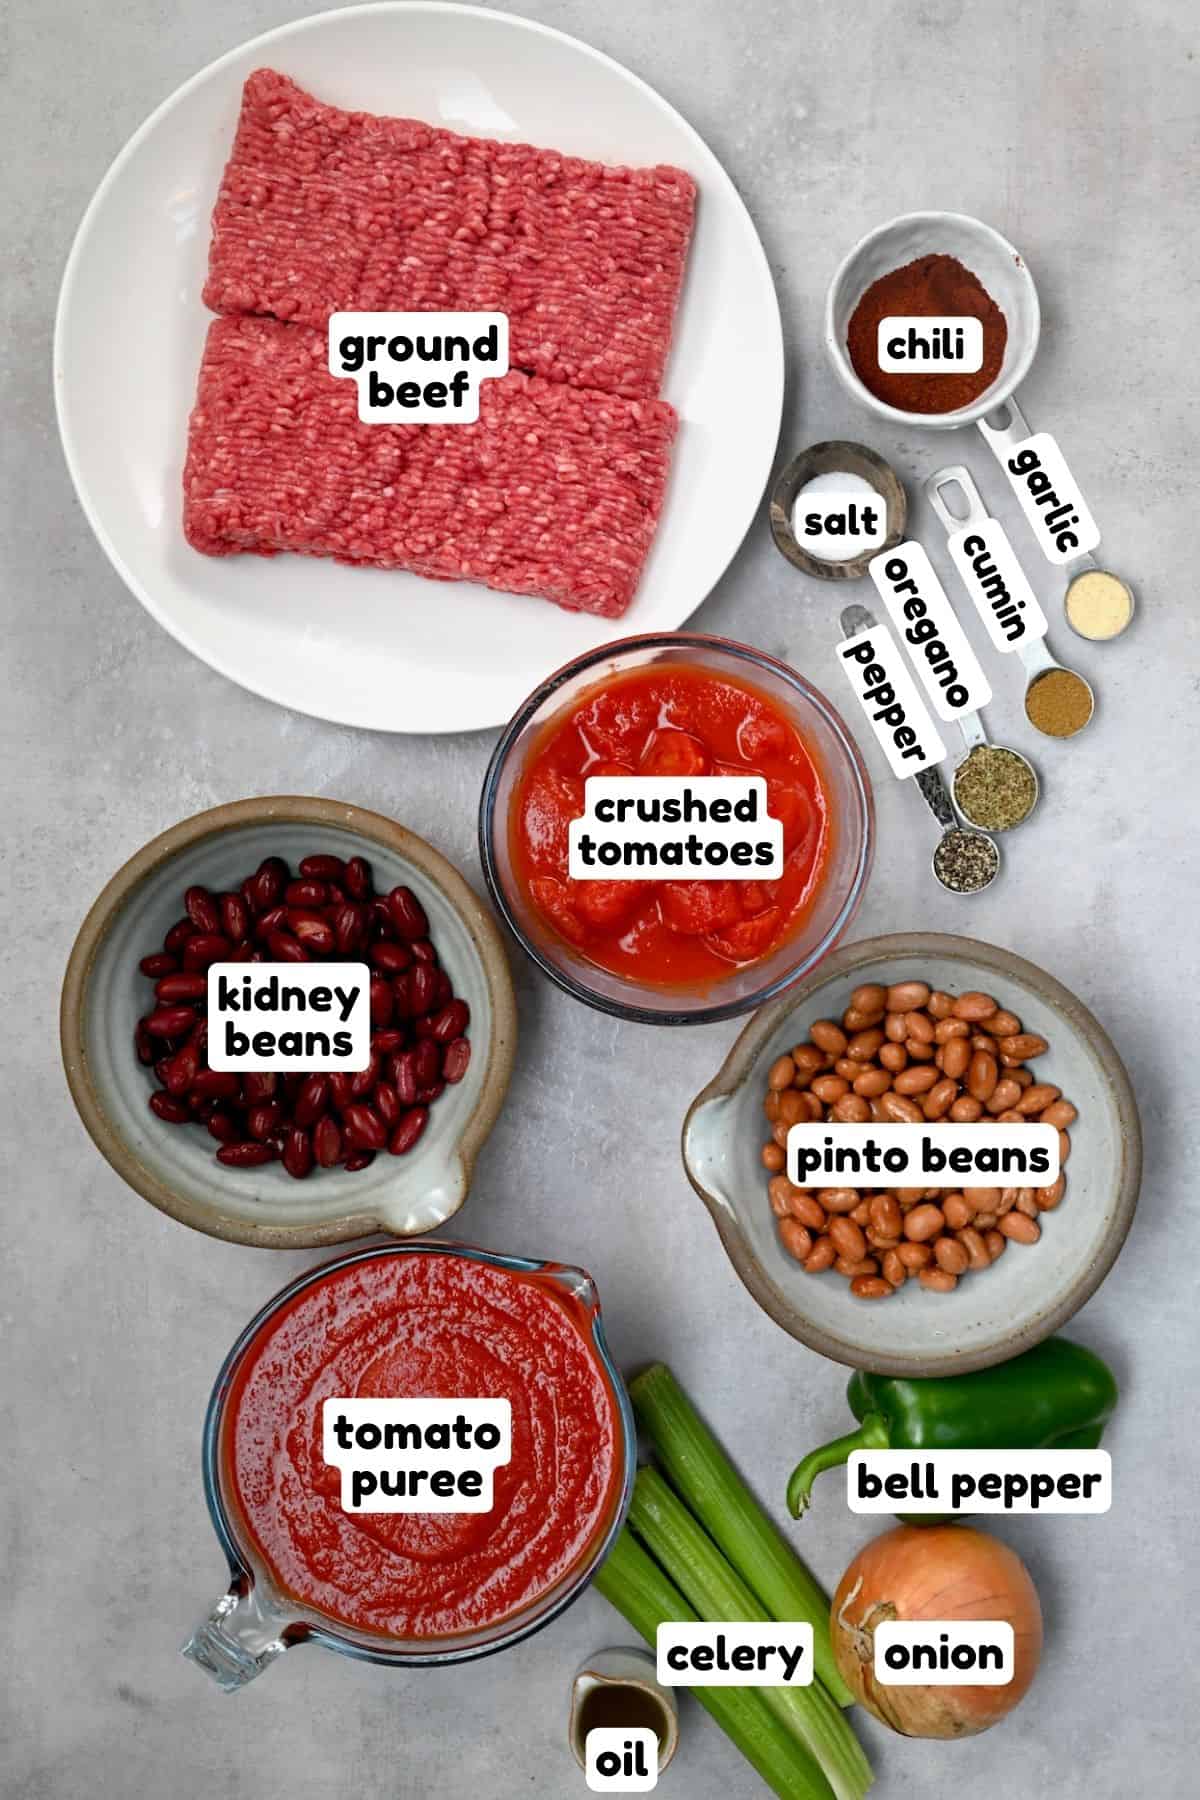 Ingredients for Wendy's Chili